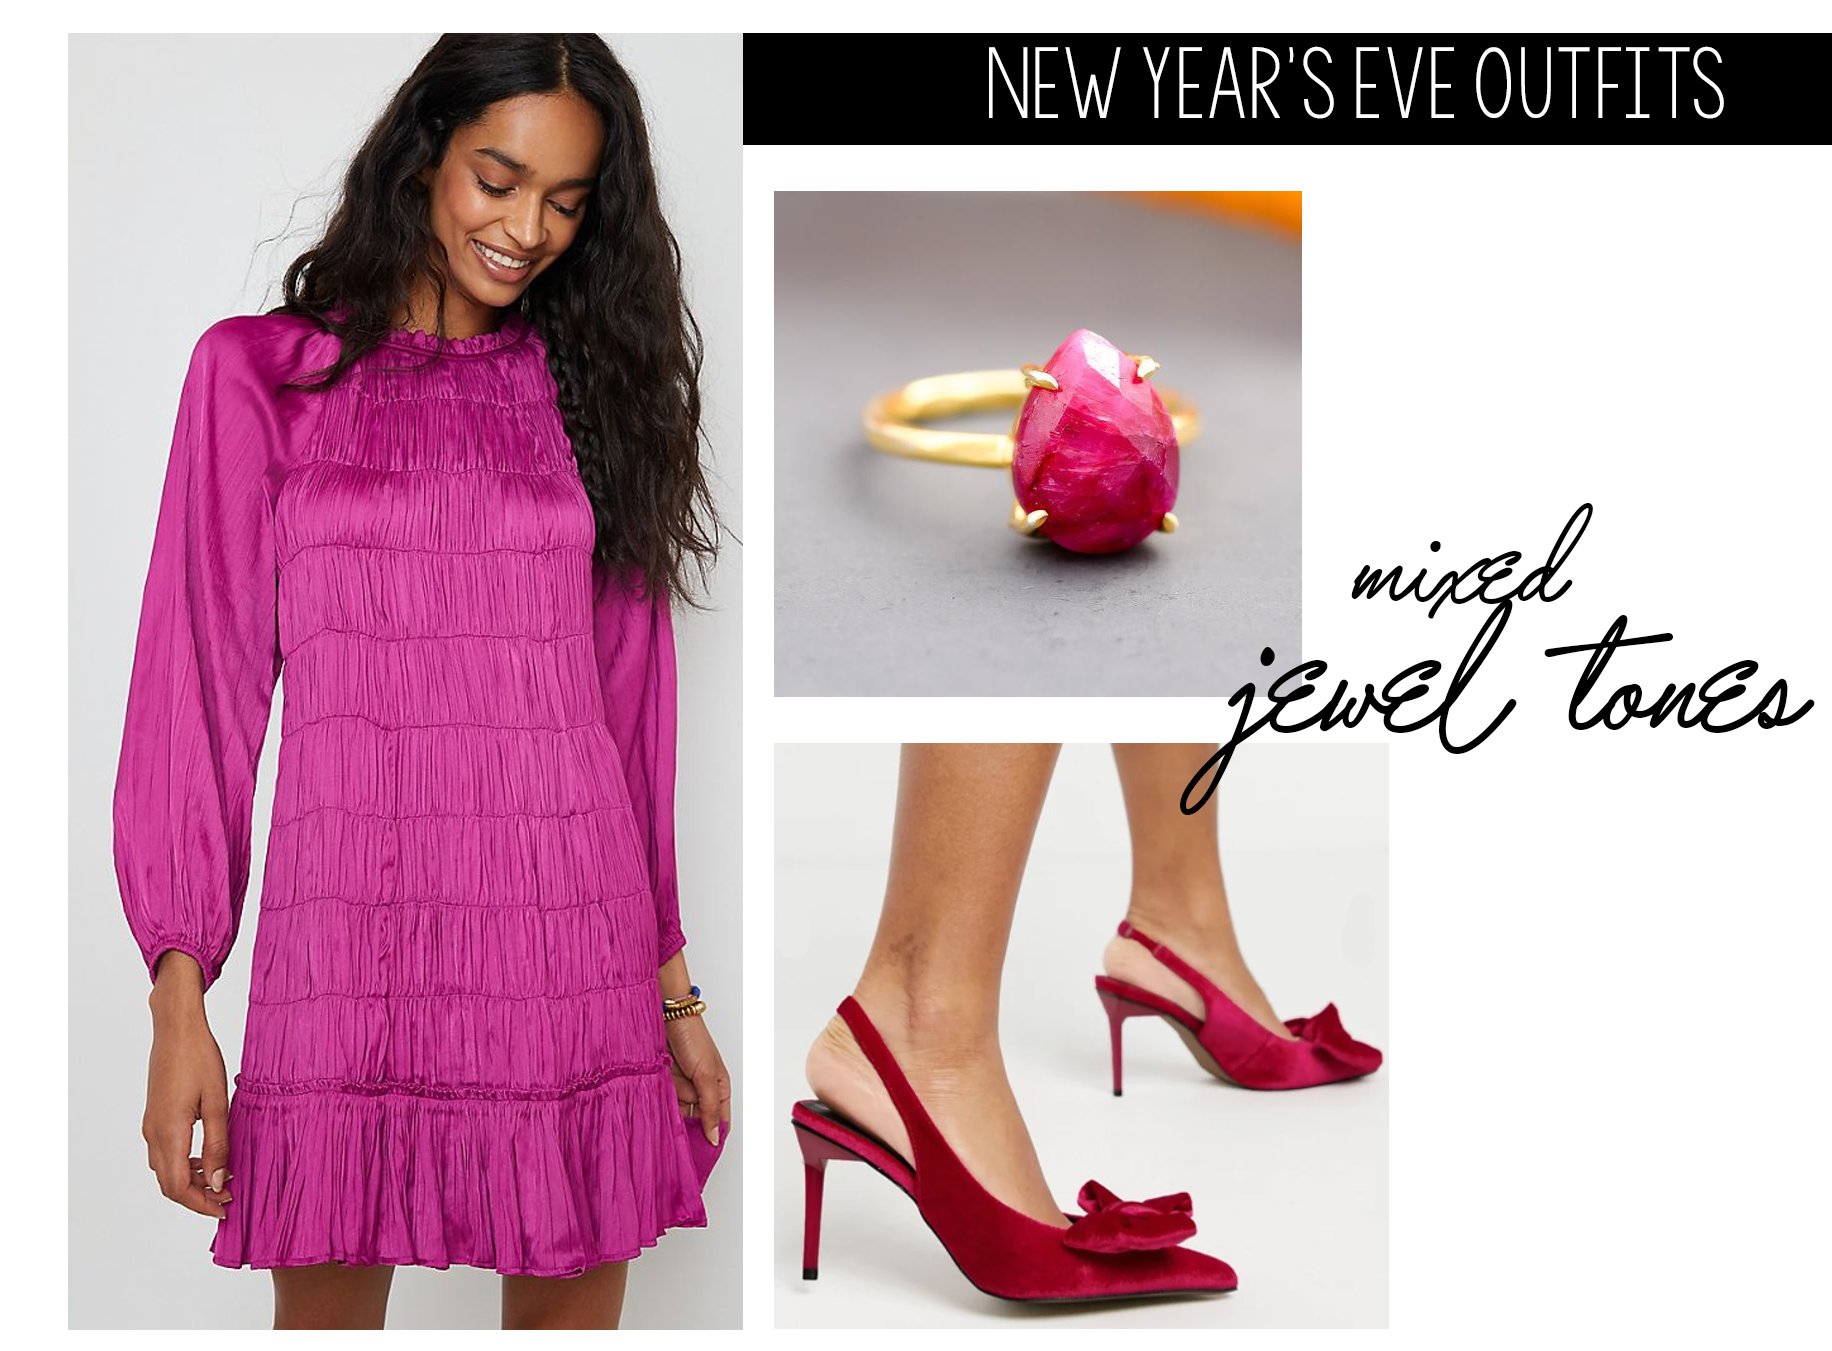 https://www.thepearlsource.com/blog/wp-content/uploads/2020/12/New-Years-Eve-outfit-ideas-jewel-tones.jpg